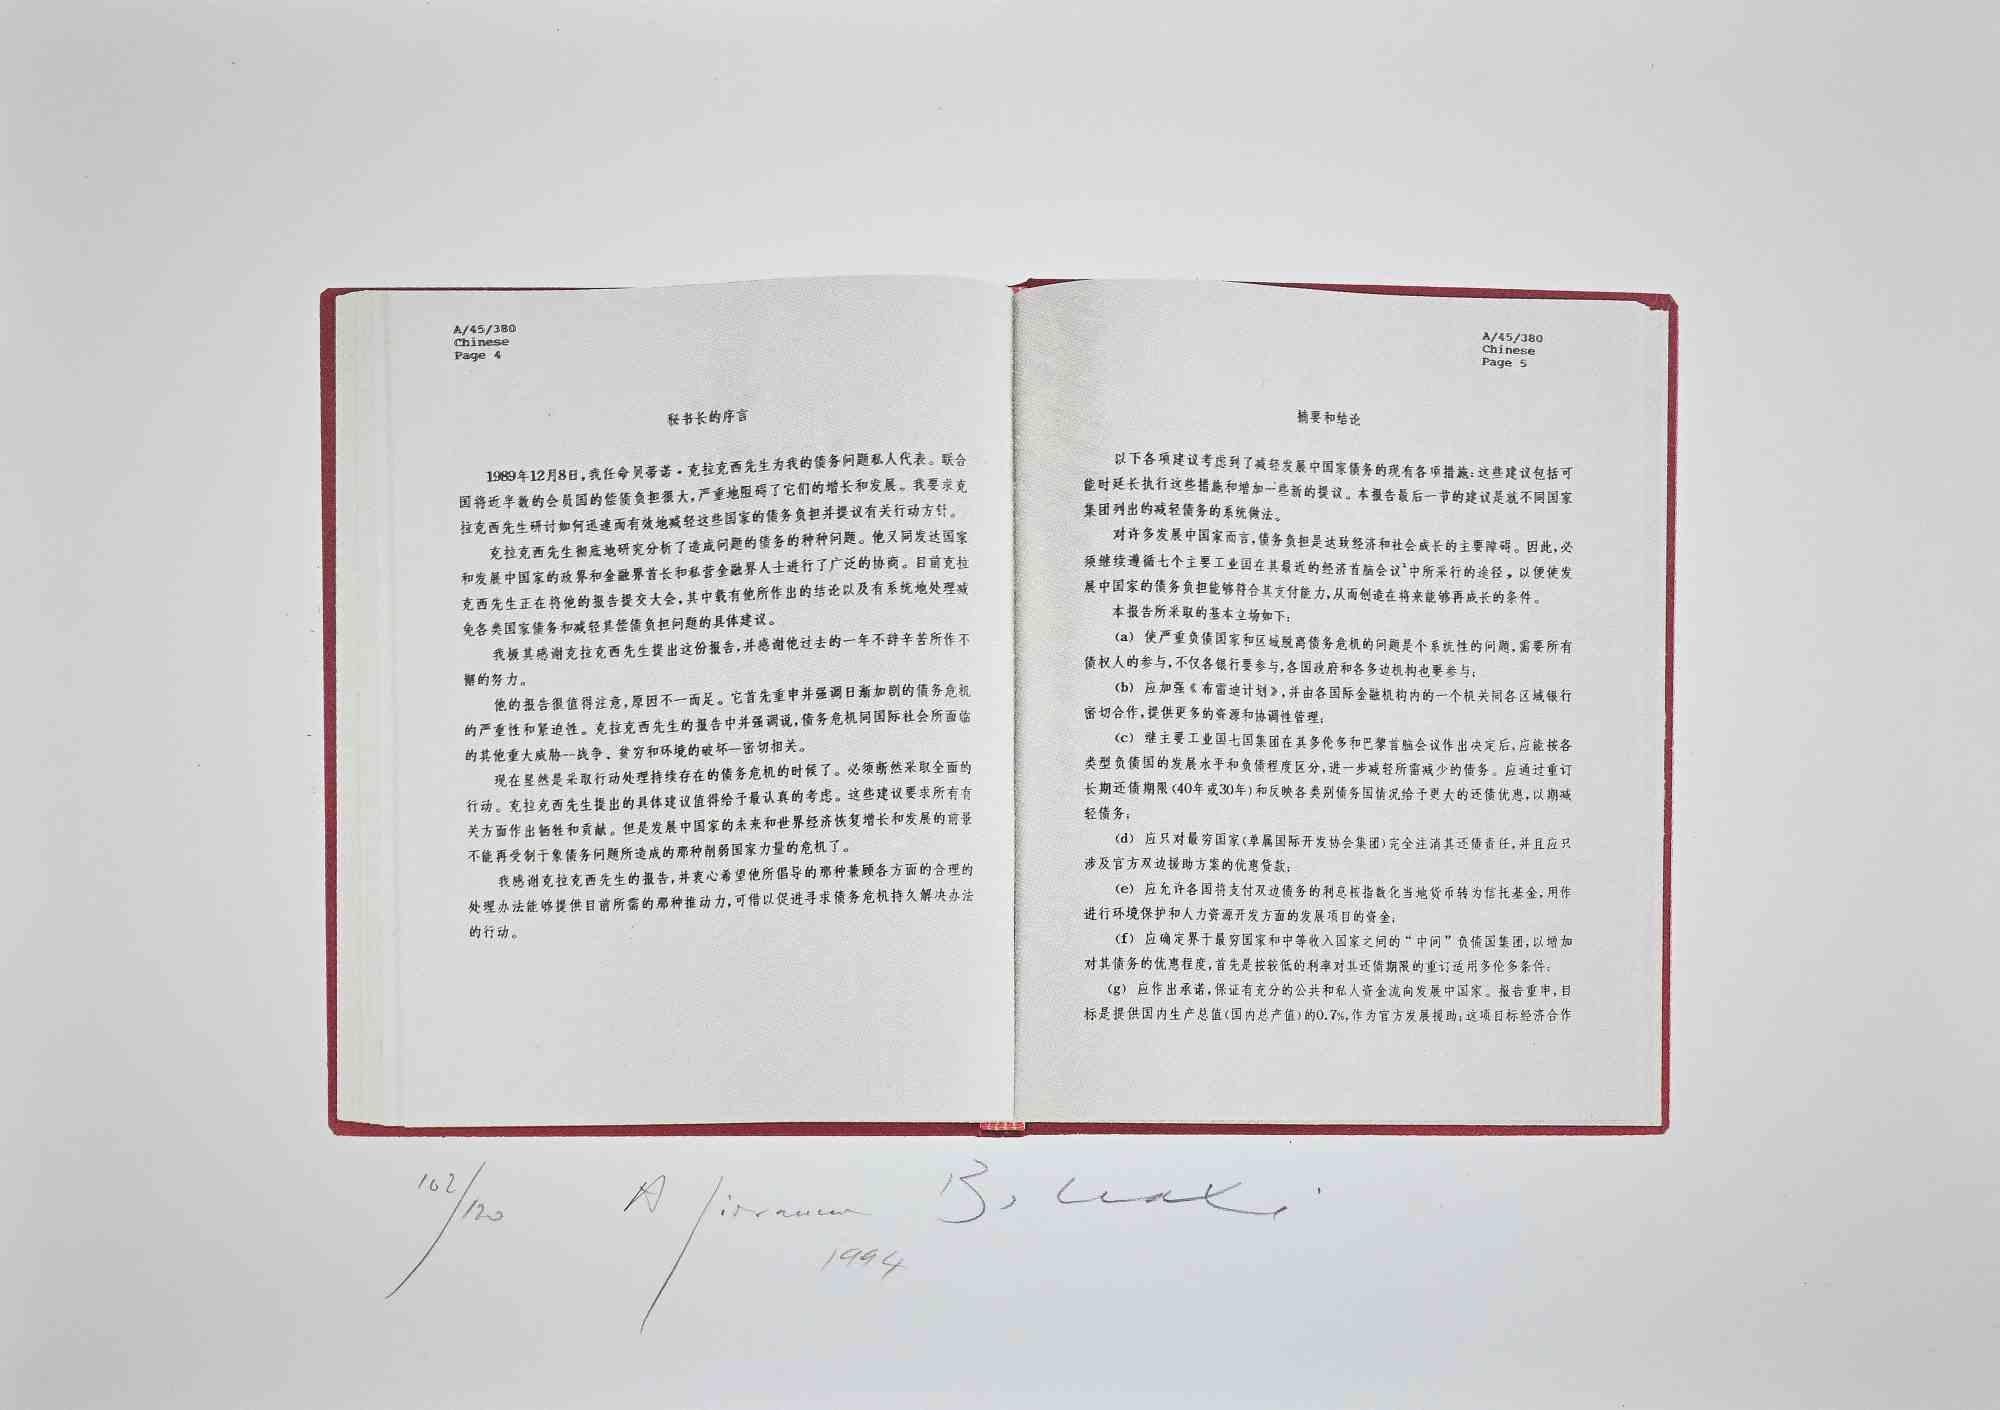 Editions of 150 samples in which 120 samples numbered from 1 to 120, and the other 30 samples are numbered from i to xxx. (102/120)

Published in the portfolio "In the World", Ed. Serigraph, 1994.

Hand-Signed, dated, numbered